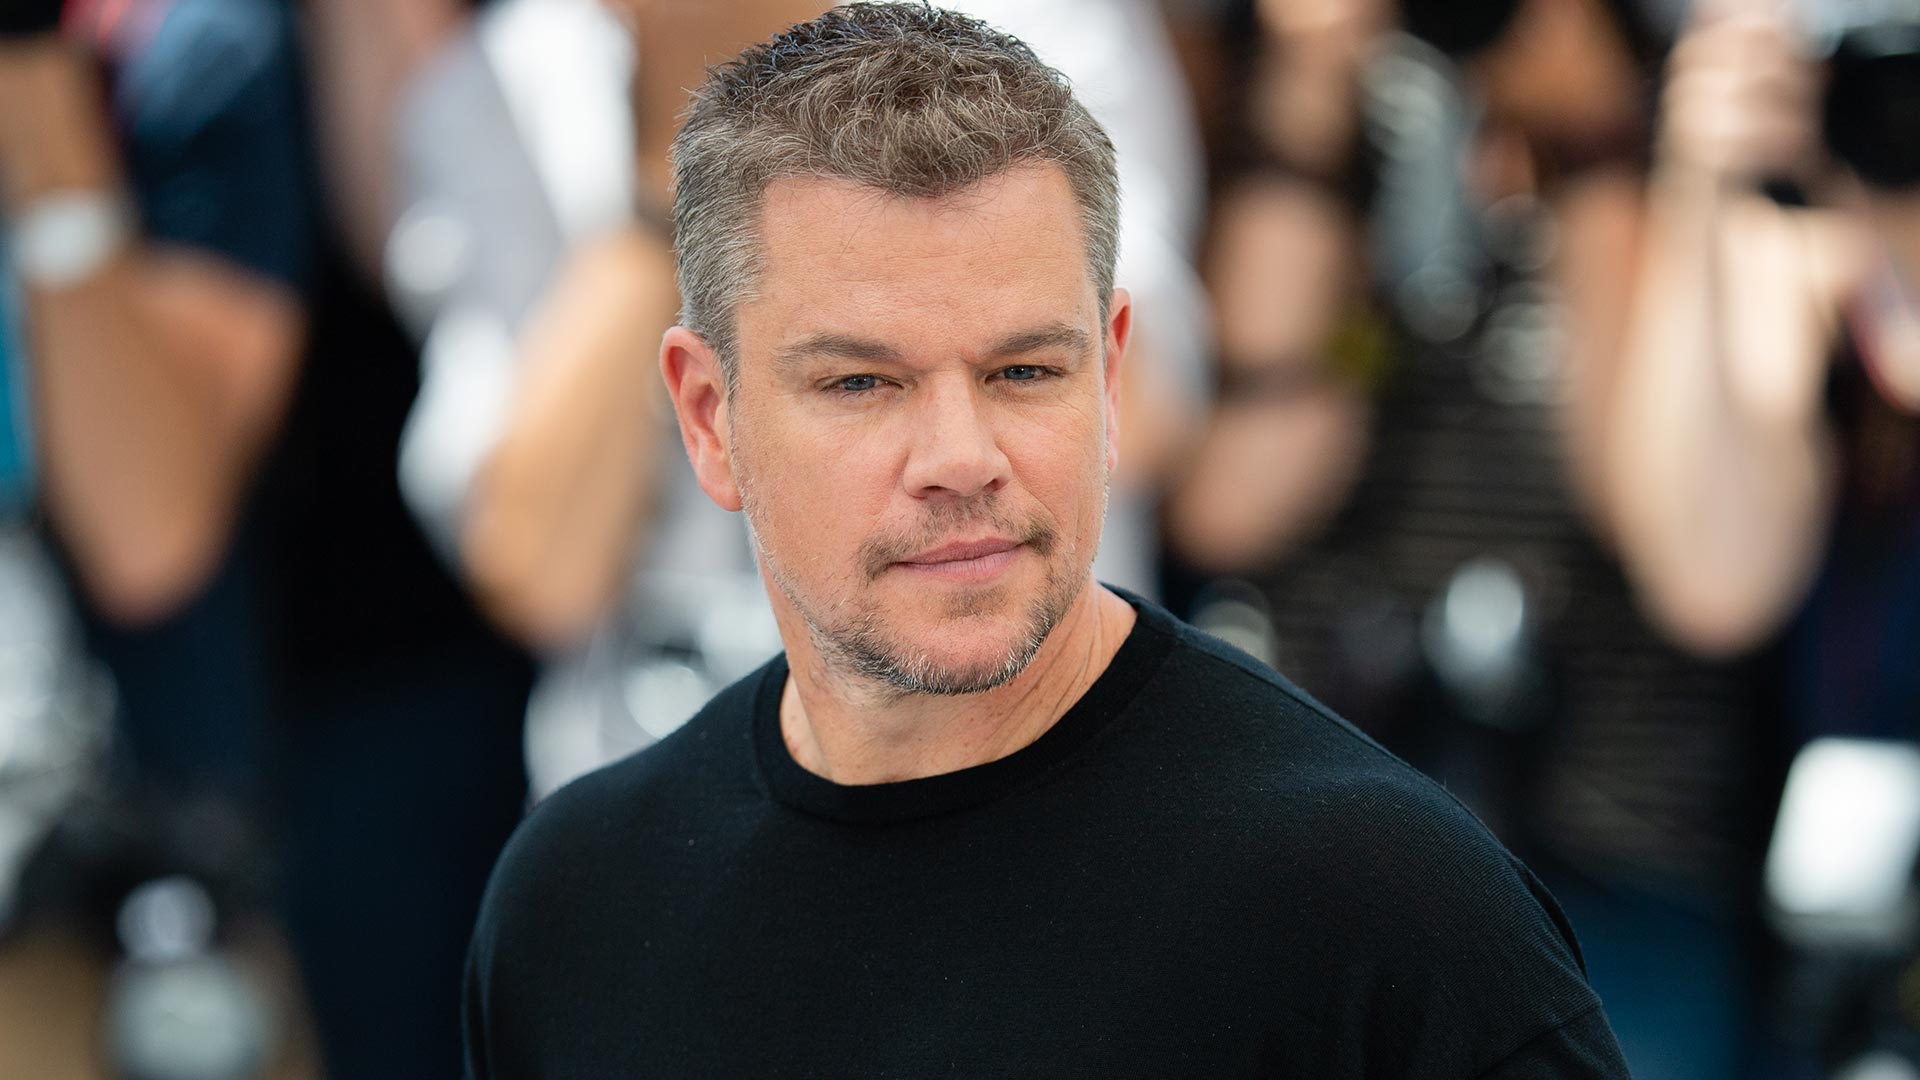 CANNES, FRANCE - JULY 09: Matt Damon attends "Stillwater" photocall during the 74th annual Cannes Film Festival on July 09, 2021 in Cannes, France. (Photo by Samir Hussein/WireImage)